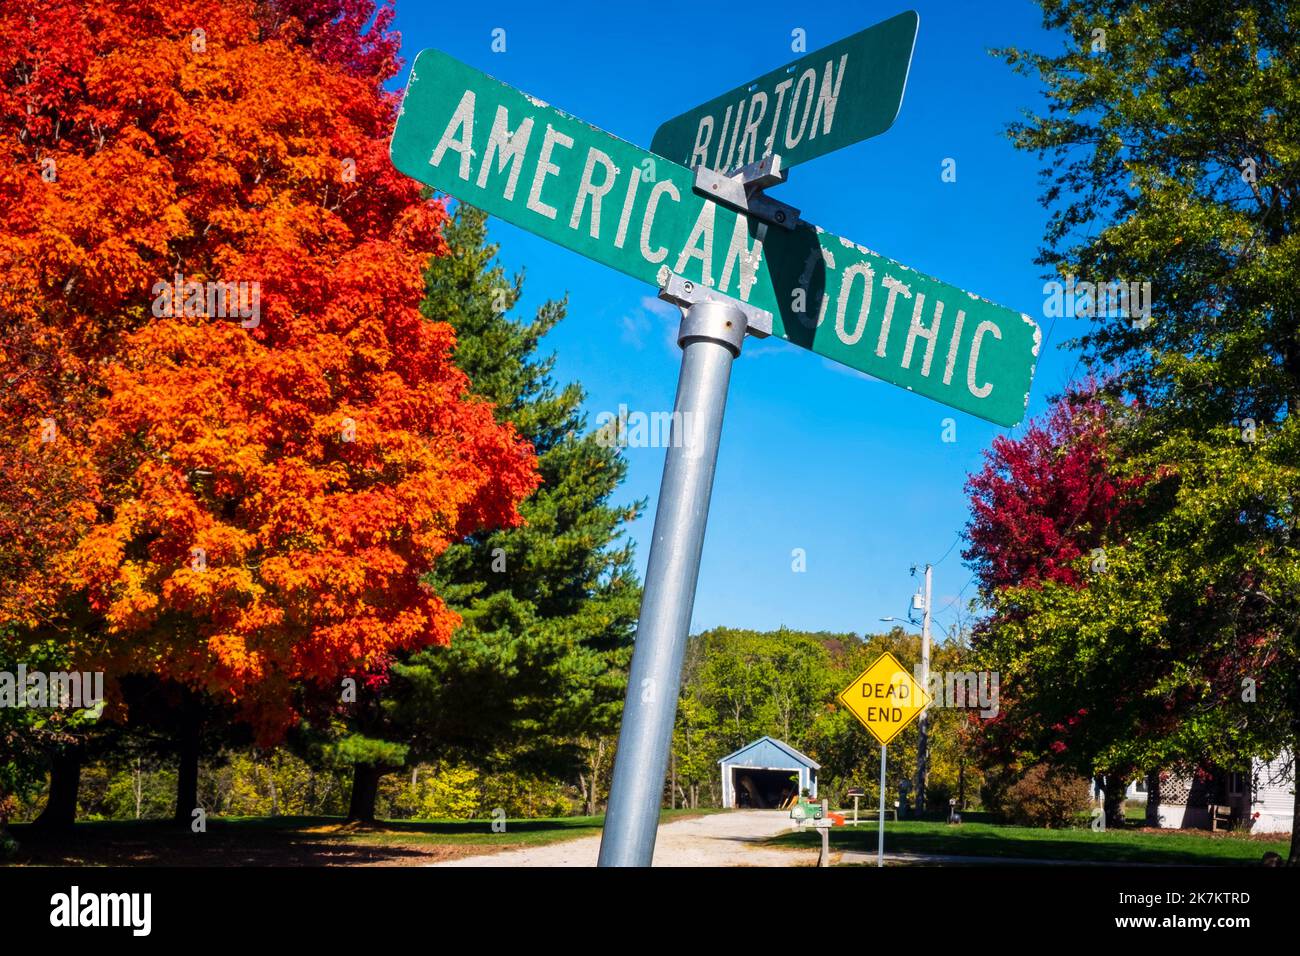 Street sign at Grant Wood's American Gothic House, Eldon, Iowa; bright fall colors, blue sky, October day Stock Photo